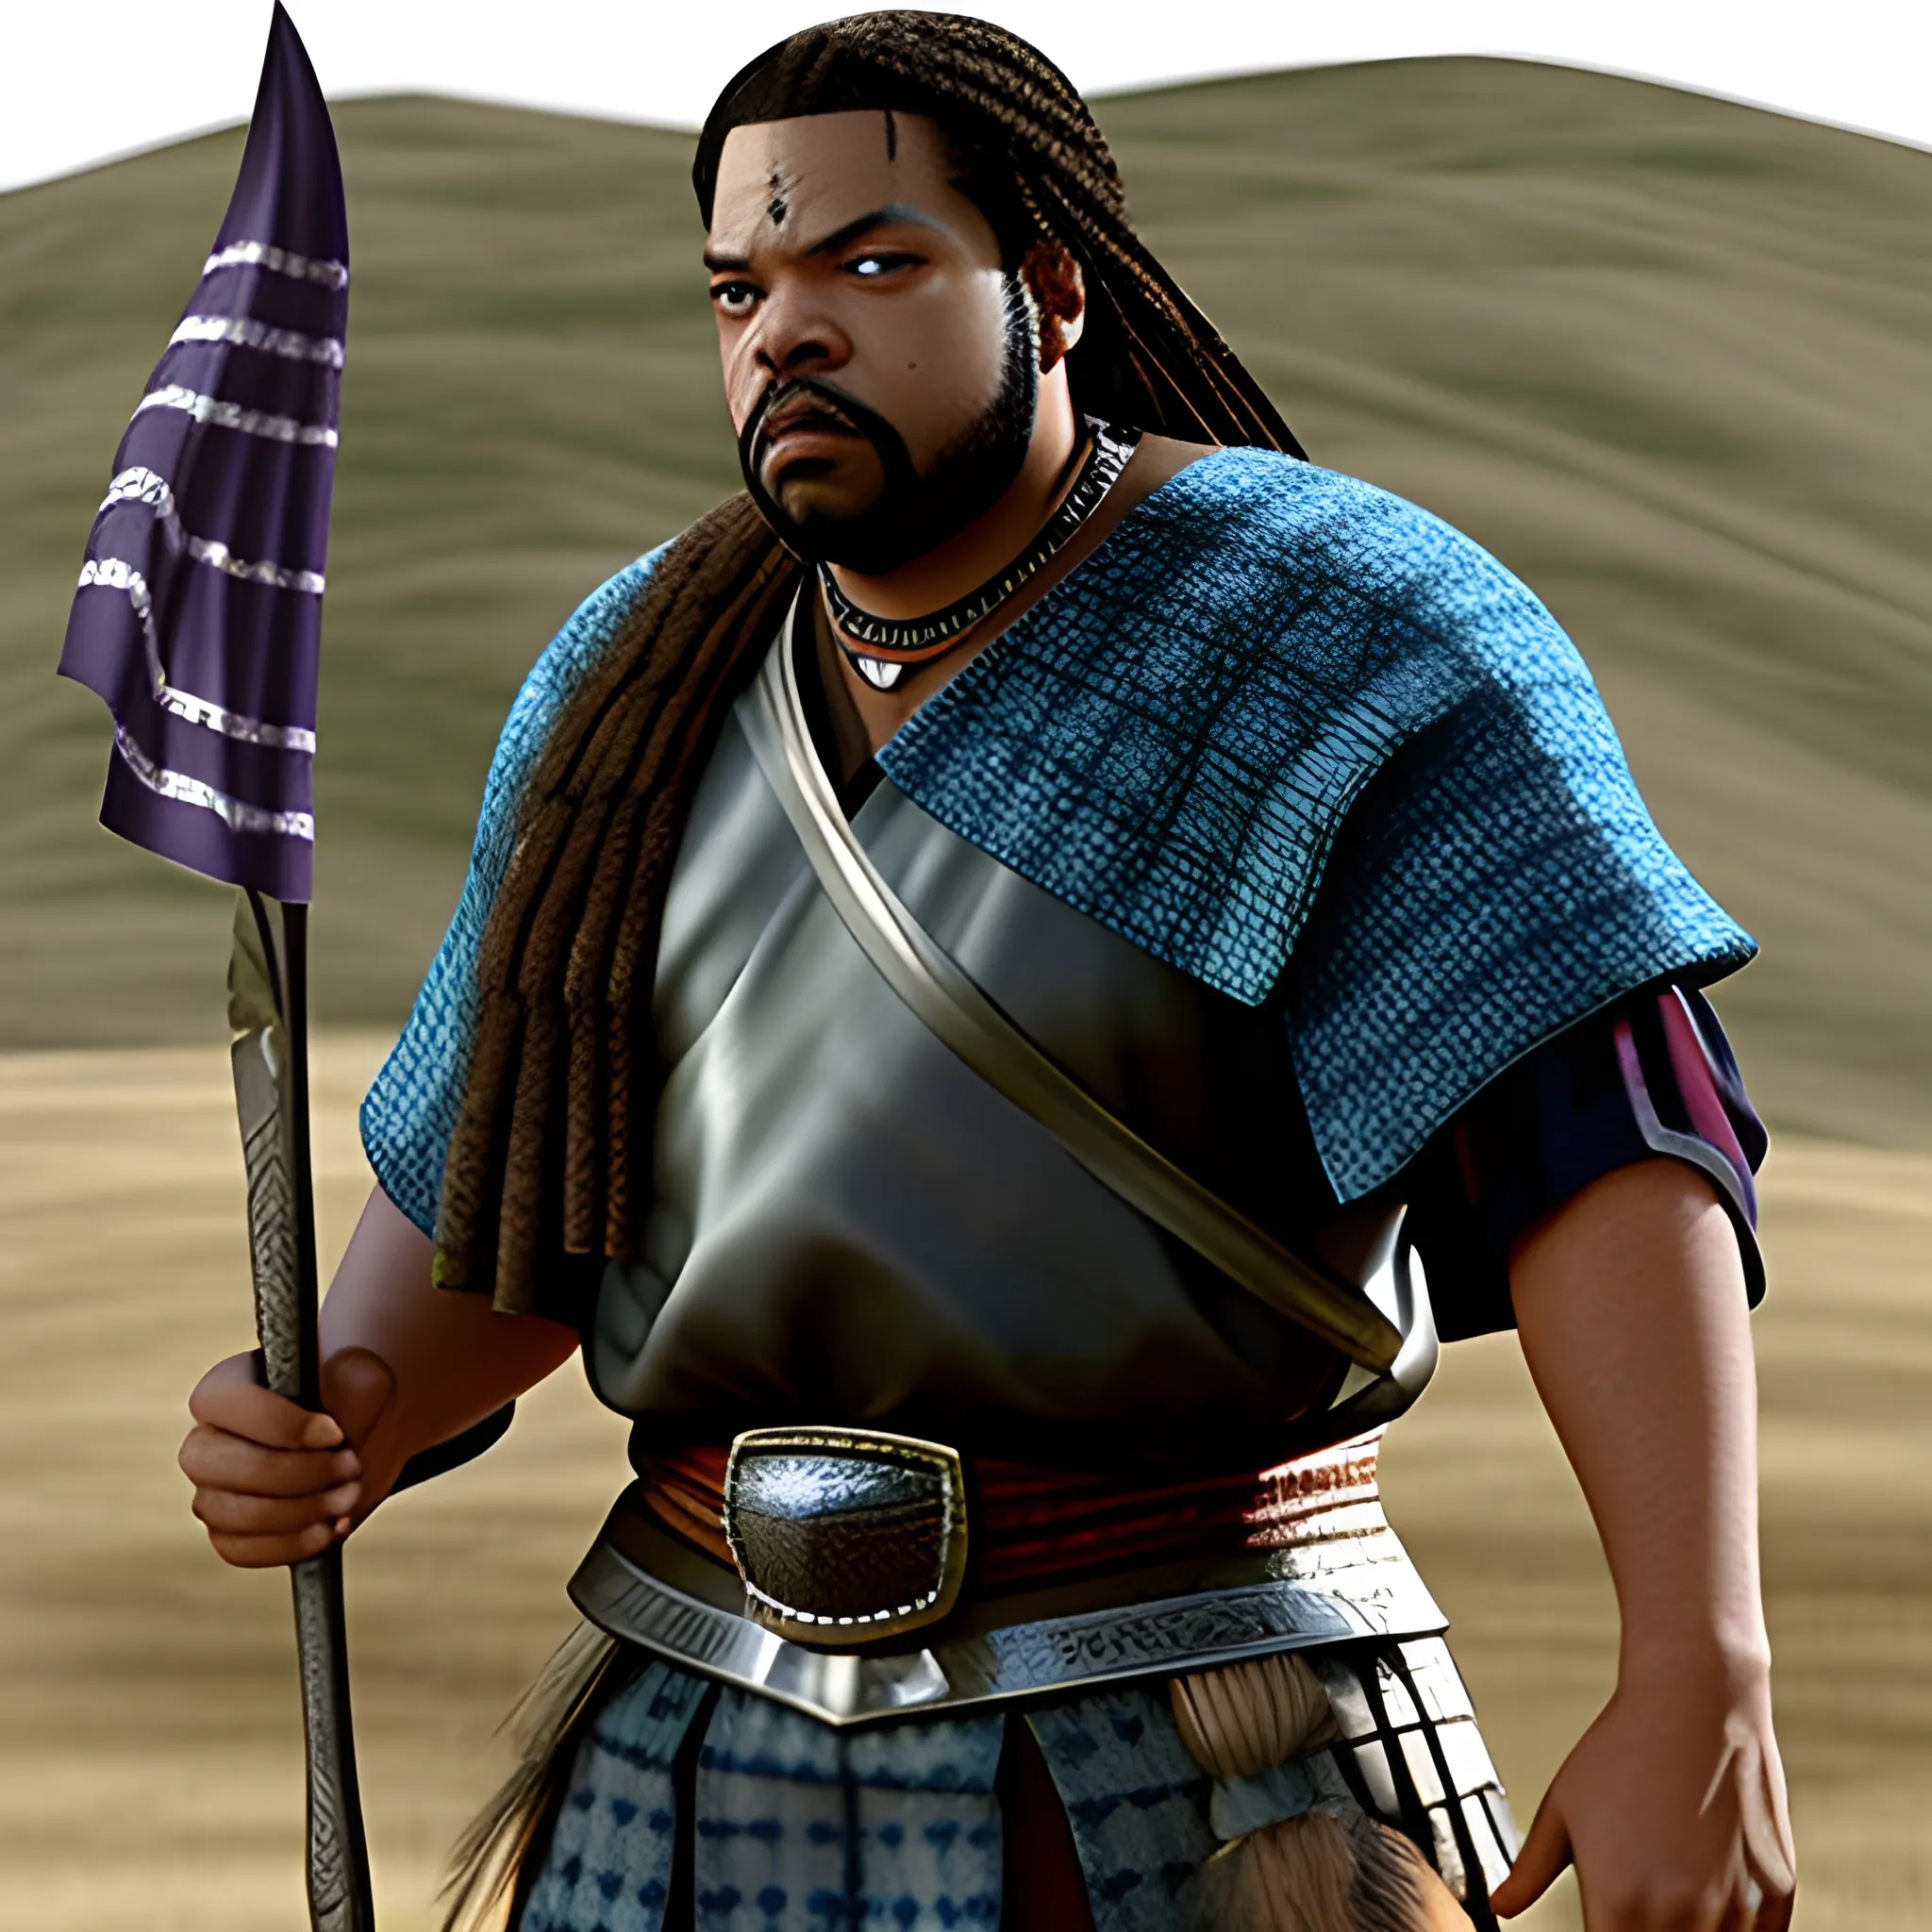 ice cube as William wallace from Braveheart movie as an African American 3D